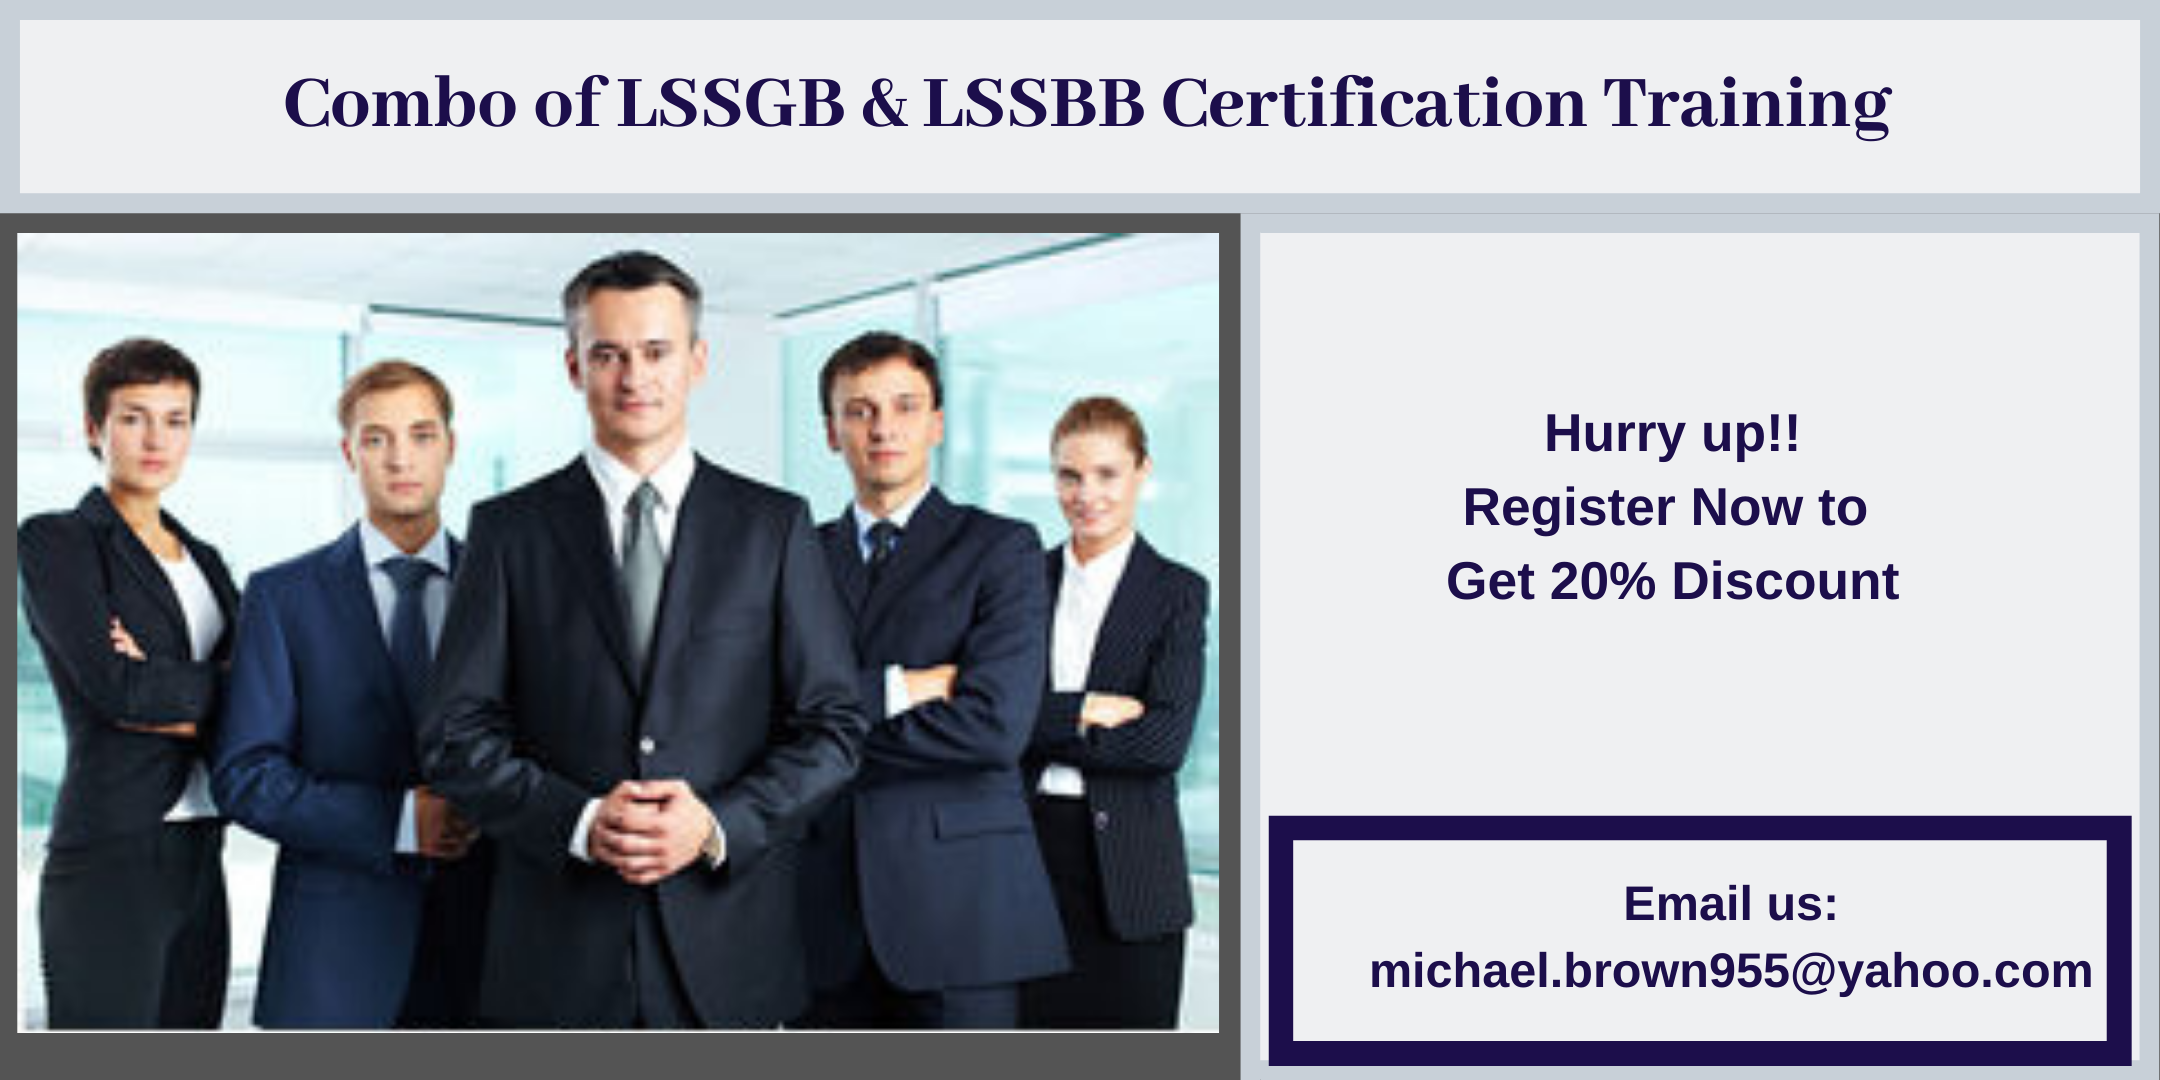 Combo of LSSGB & LSSBB 4 days Certification Training in Schaumburg, IL